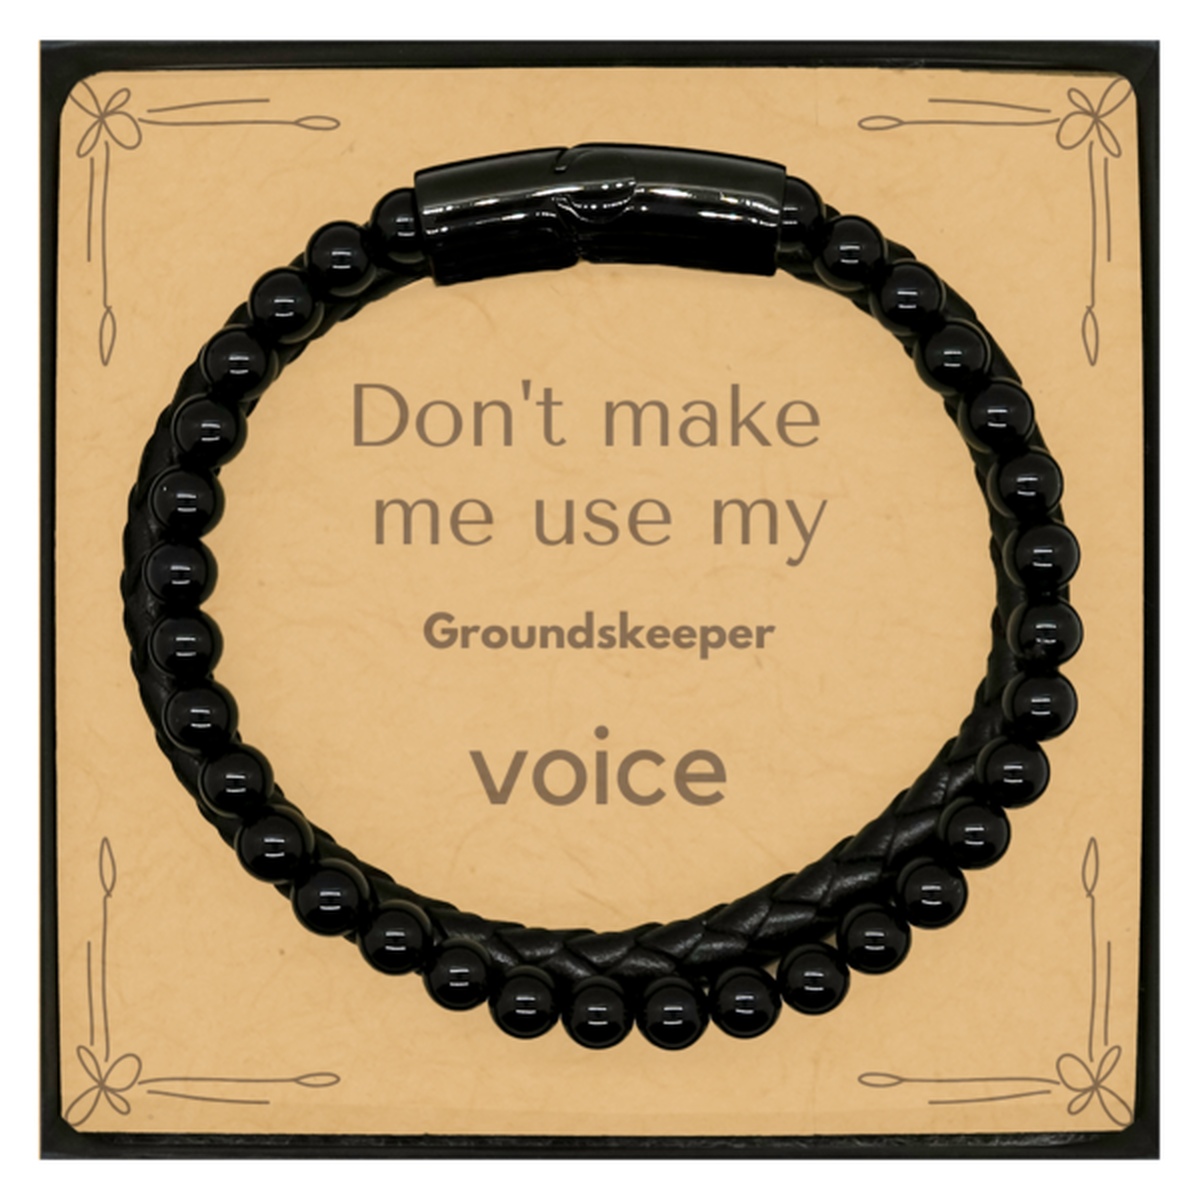 Don't make me use my Groundskeeper voice, Sarcasm Groundskeeper Card Gifts, Christmas Groundskeeper Stone Leather Bracelets Birthday Unique Gifts For Groundskeeper Coworkers, Men, Women, Colleague, Friends